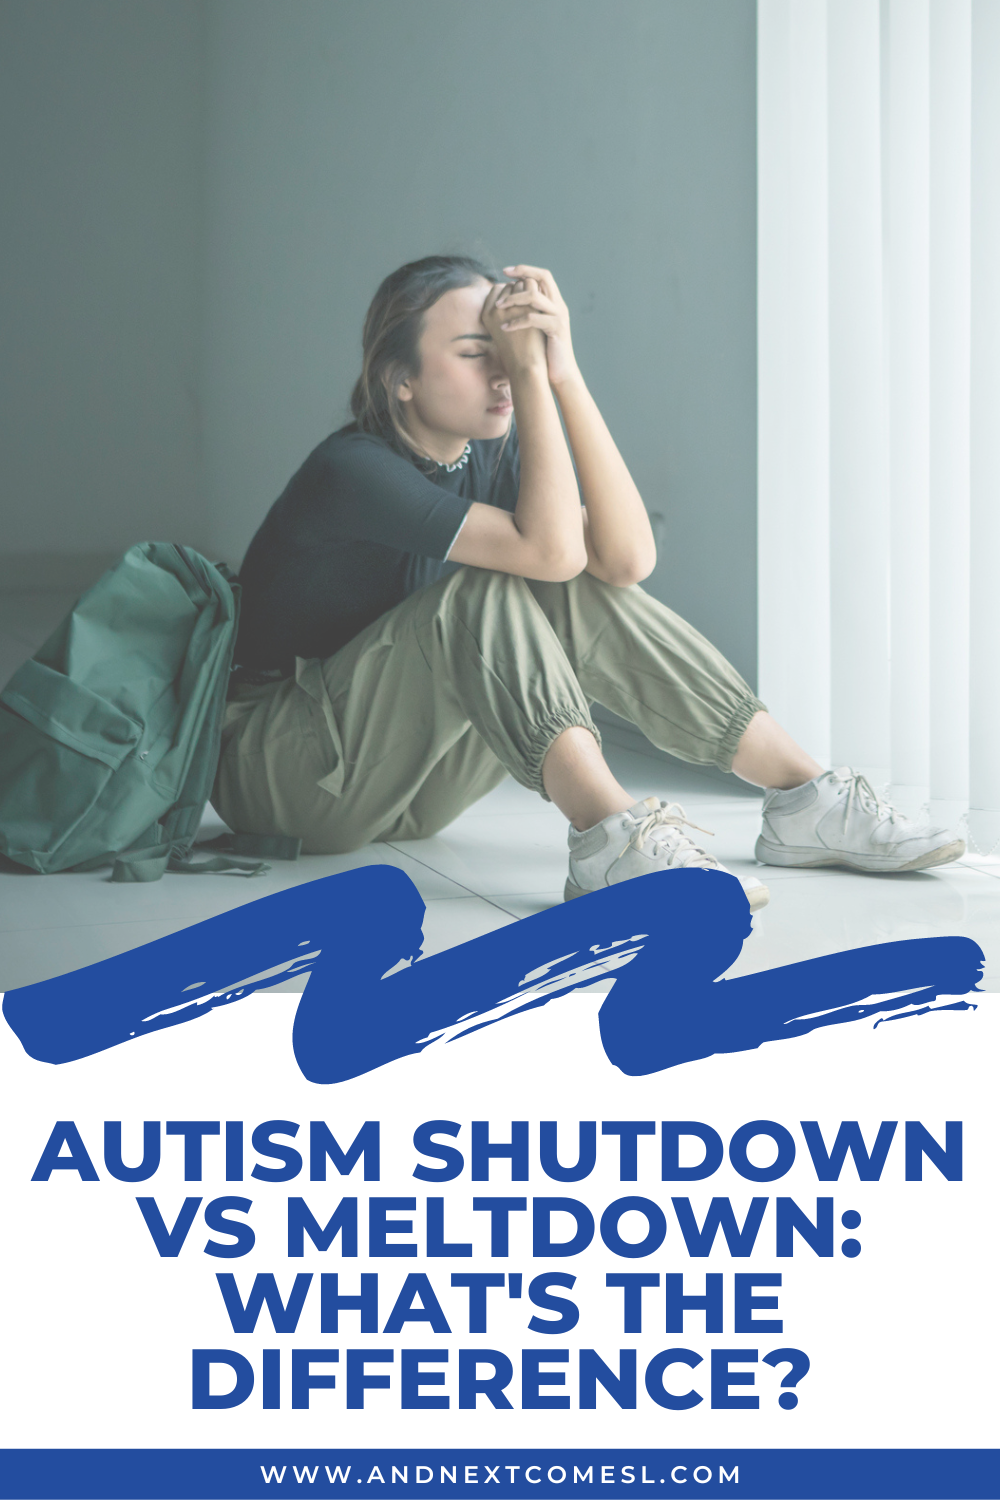 Autism shutdown vs meltdown: what's the difference? A look at the similarities and differences between autistic meltdowns and shutdowns